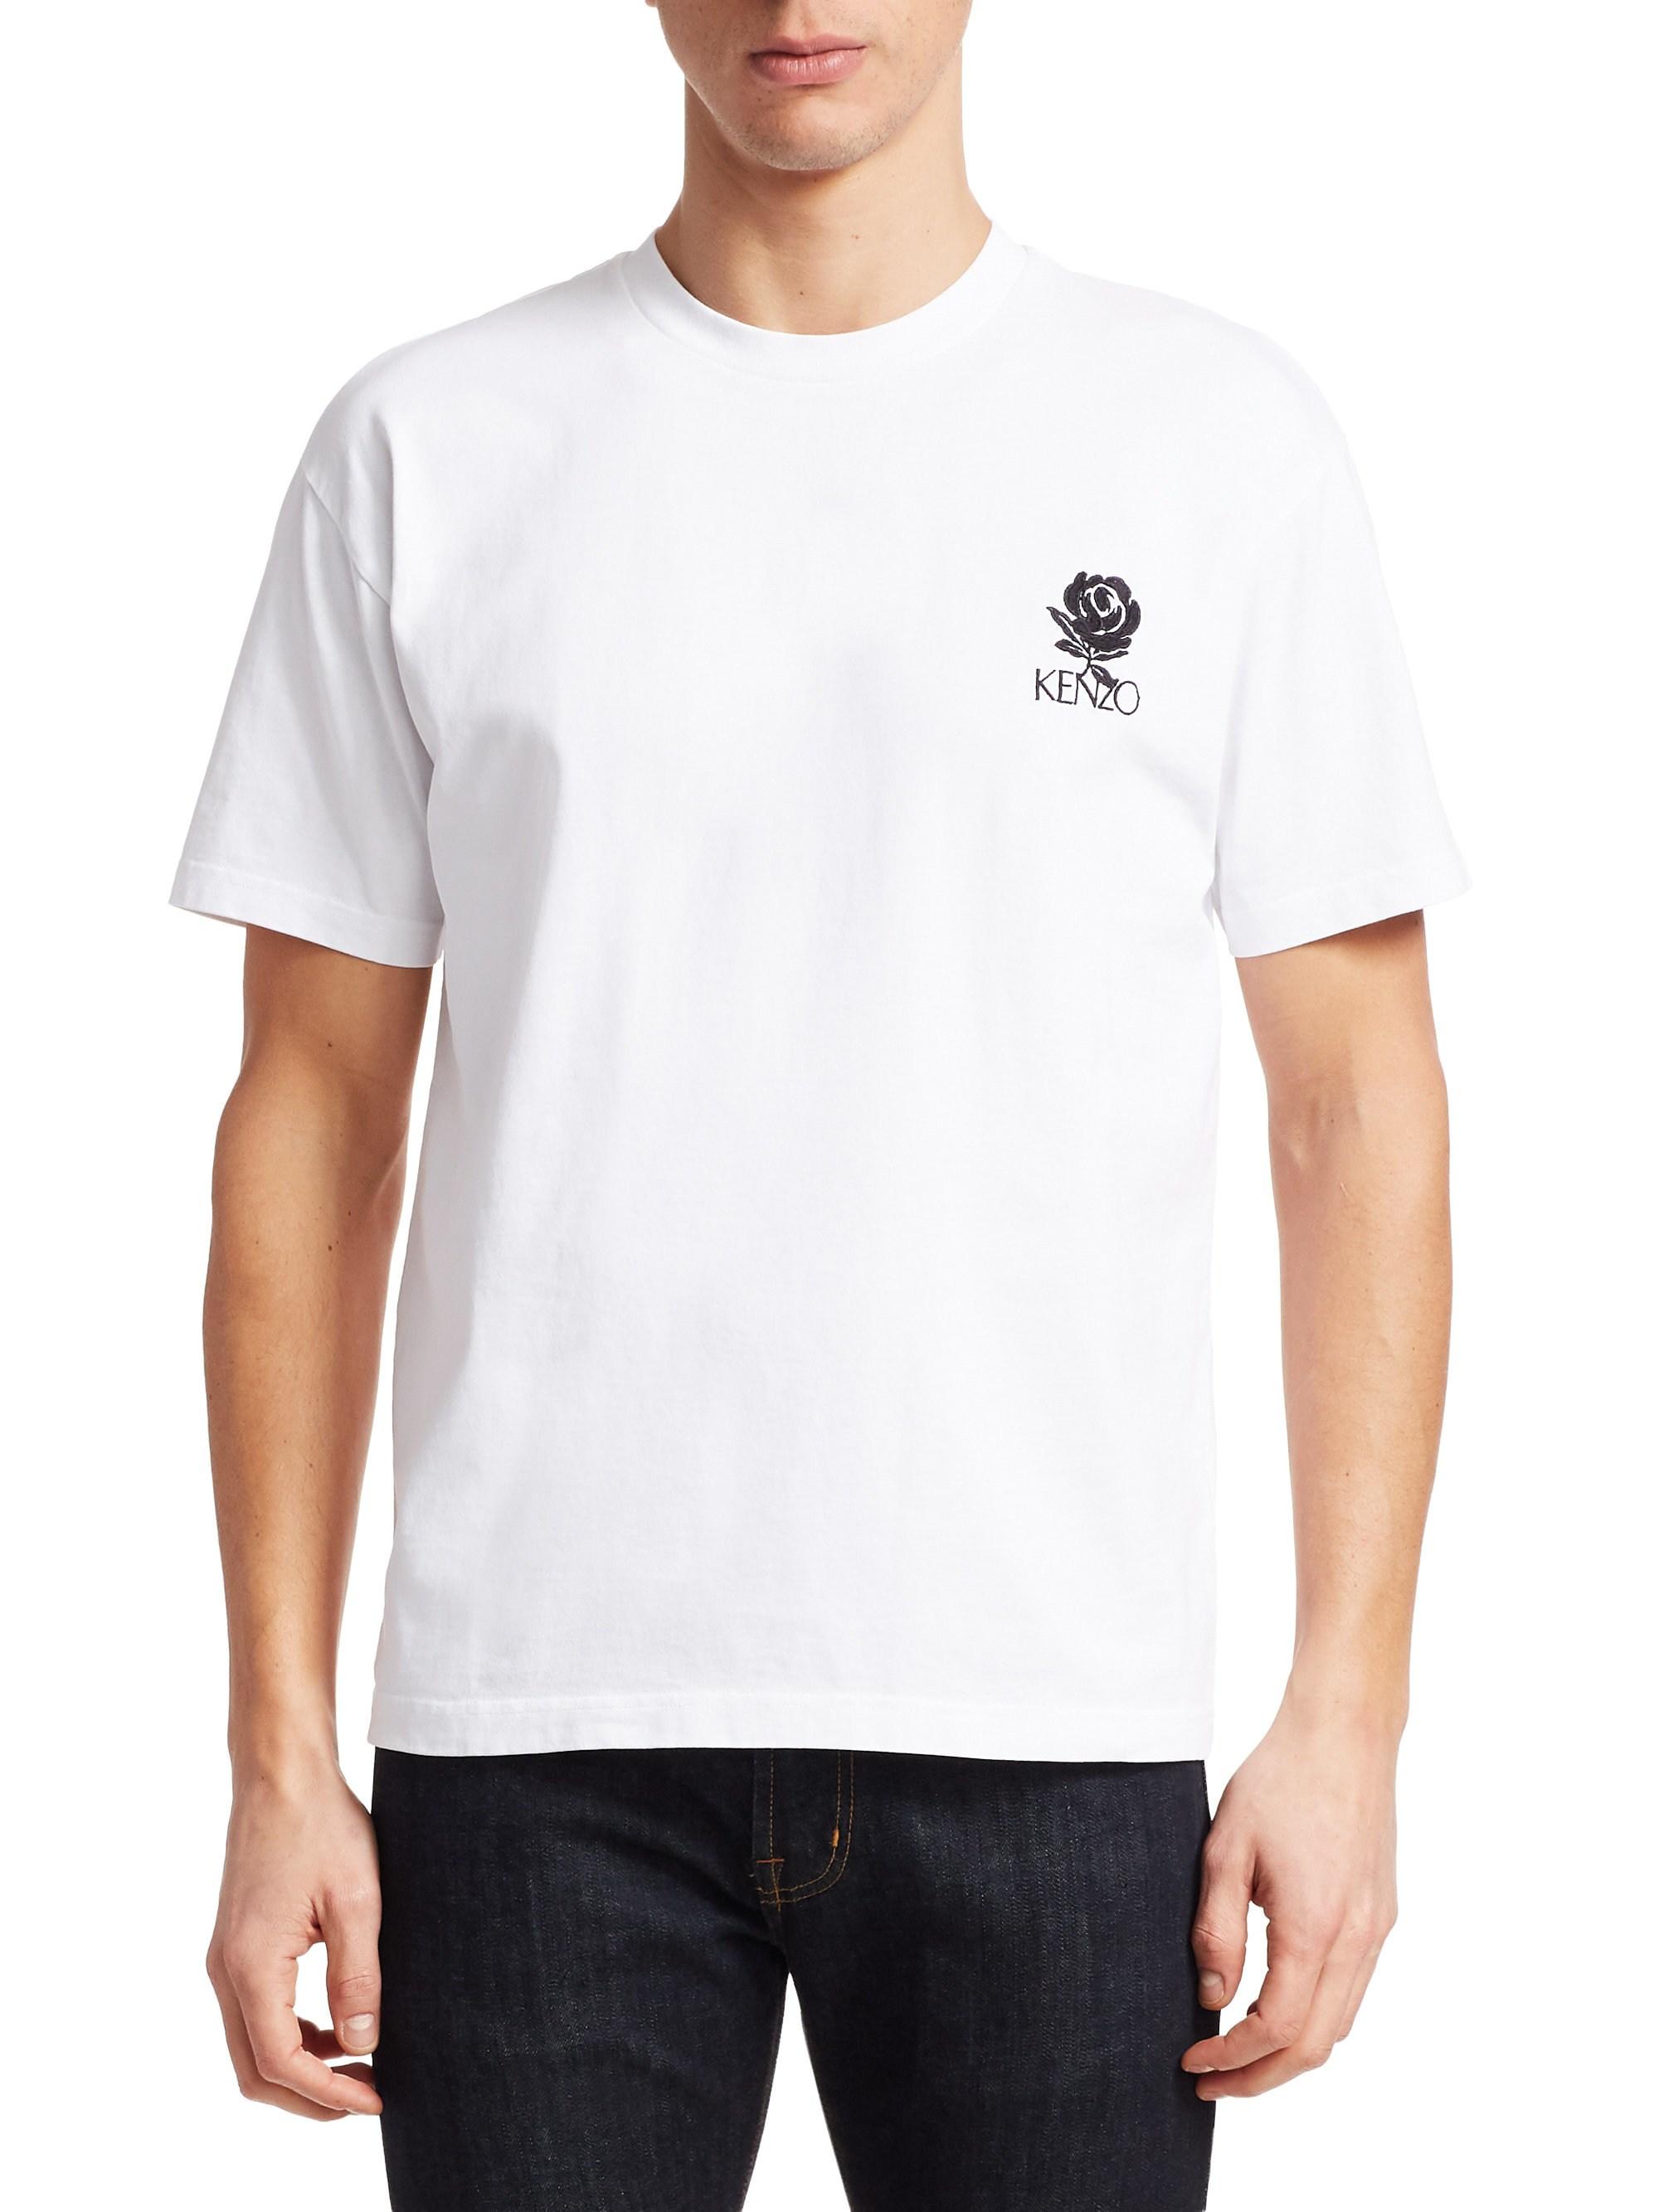 KENZO Rose Crest Cotton Tee in White 